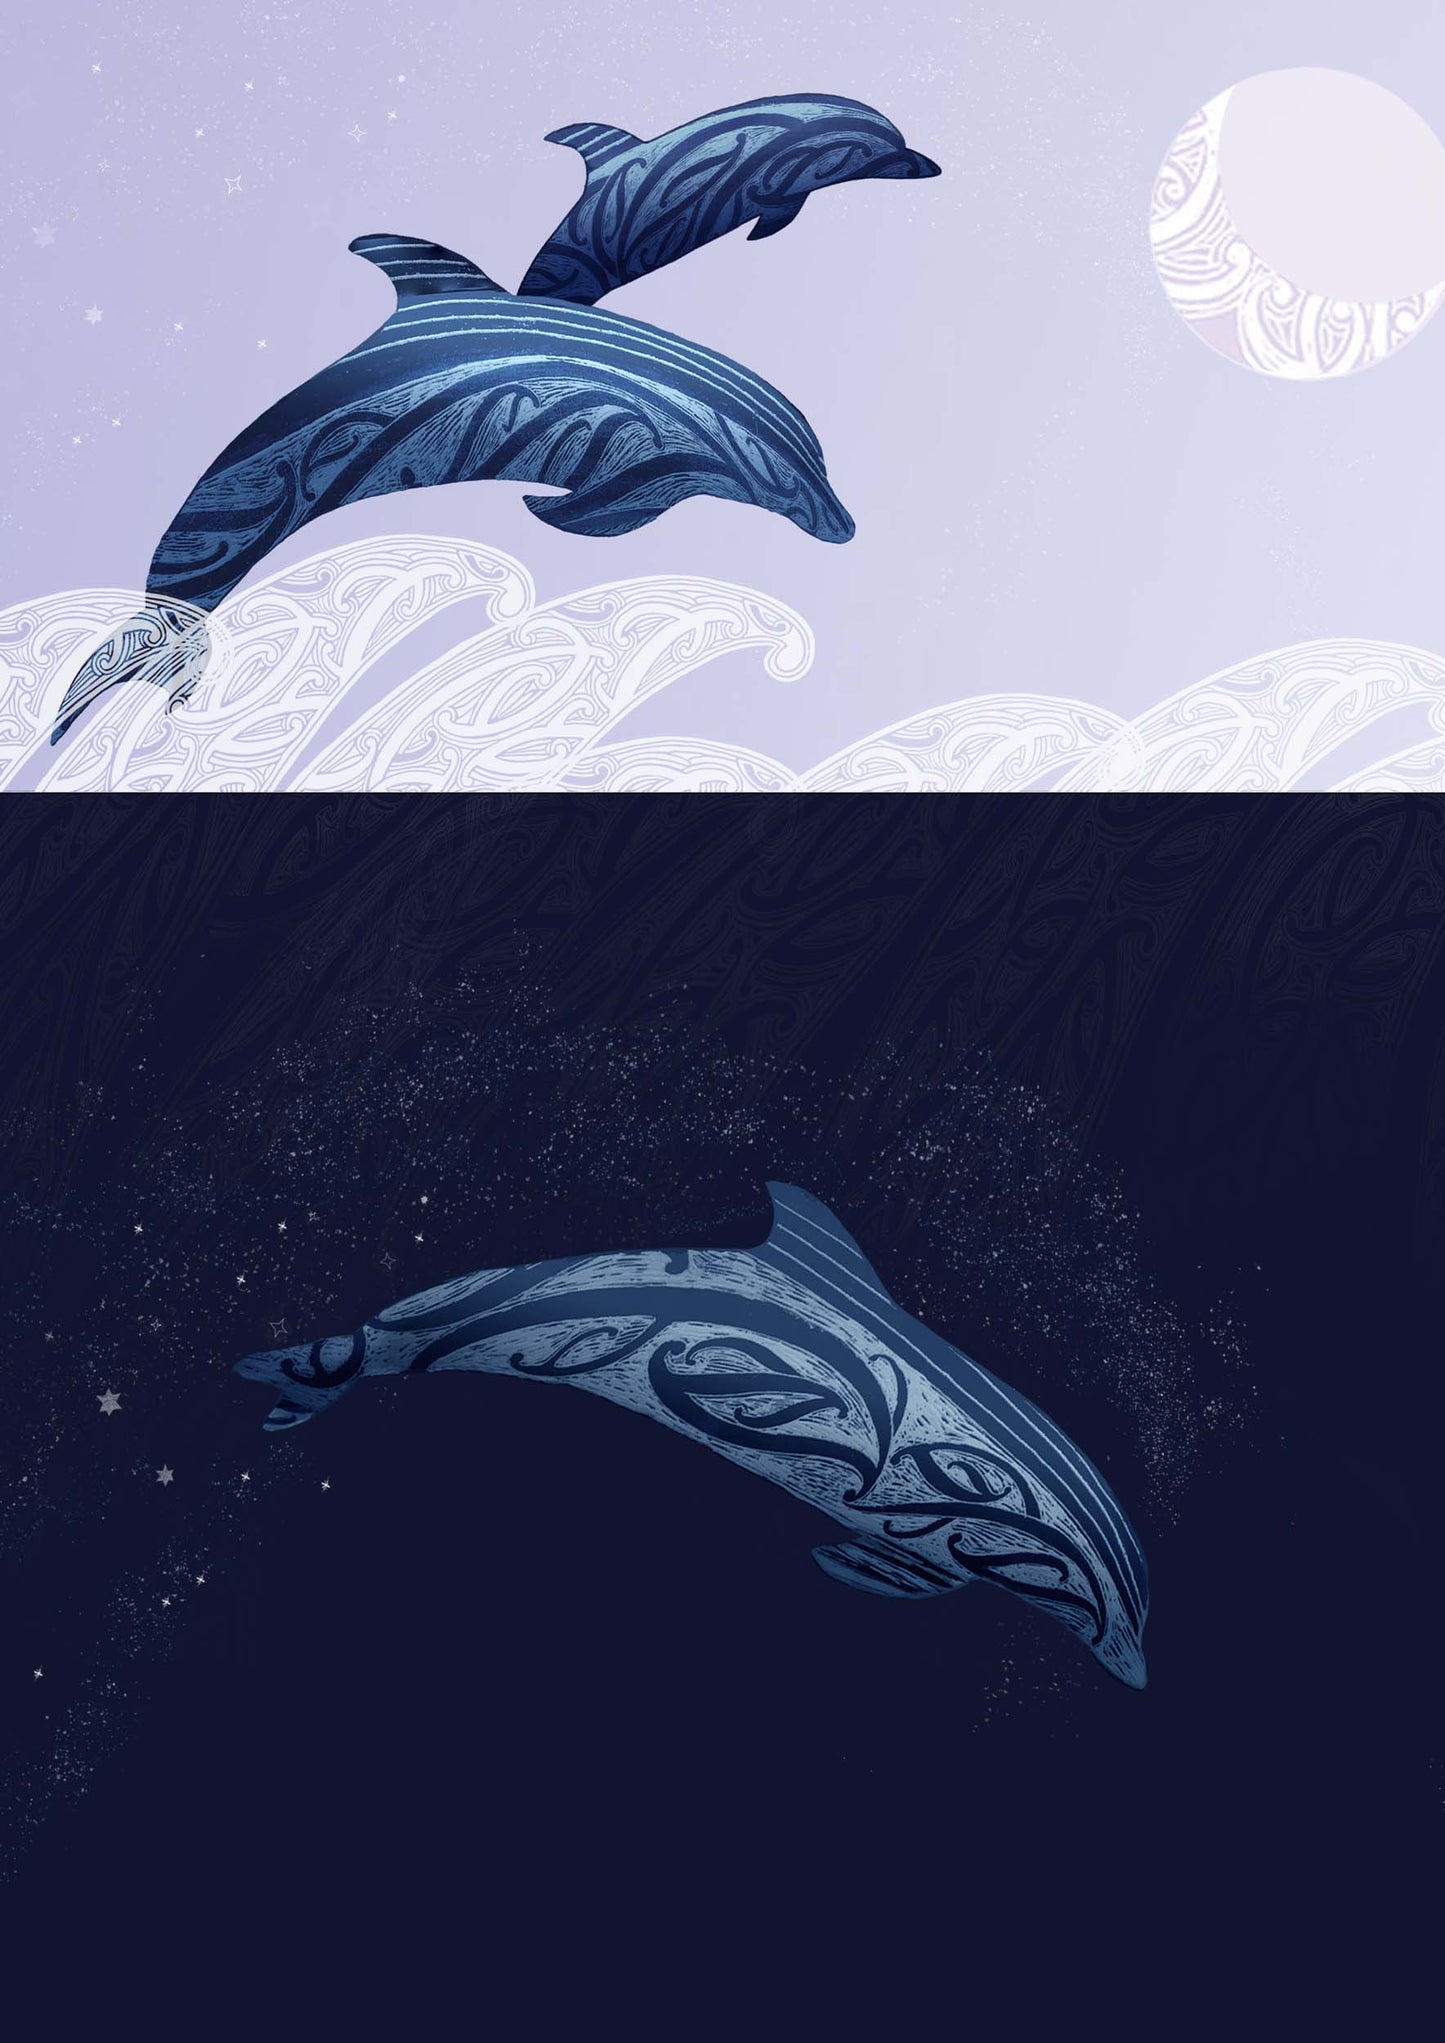 Detail of dolphin art print with maori art design elements and words from Po atarau now is the hour in te reo and english. By amber Smith nz artist